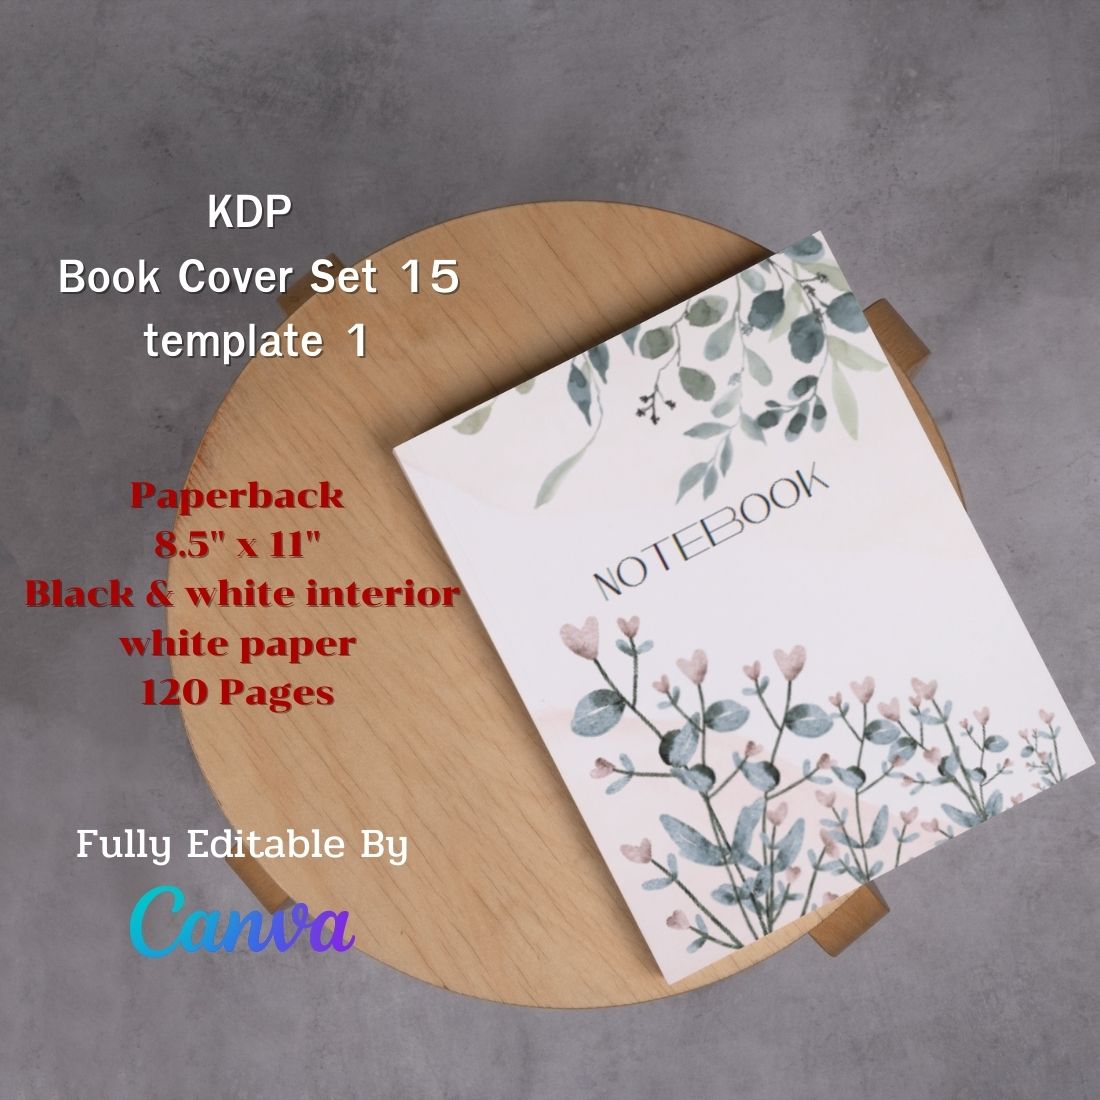 KDP Book Cover Set #15 Canva Template – Paperback preview image.